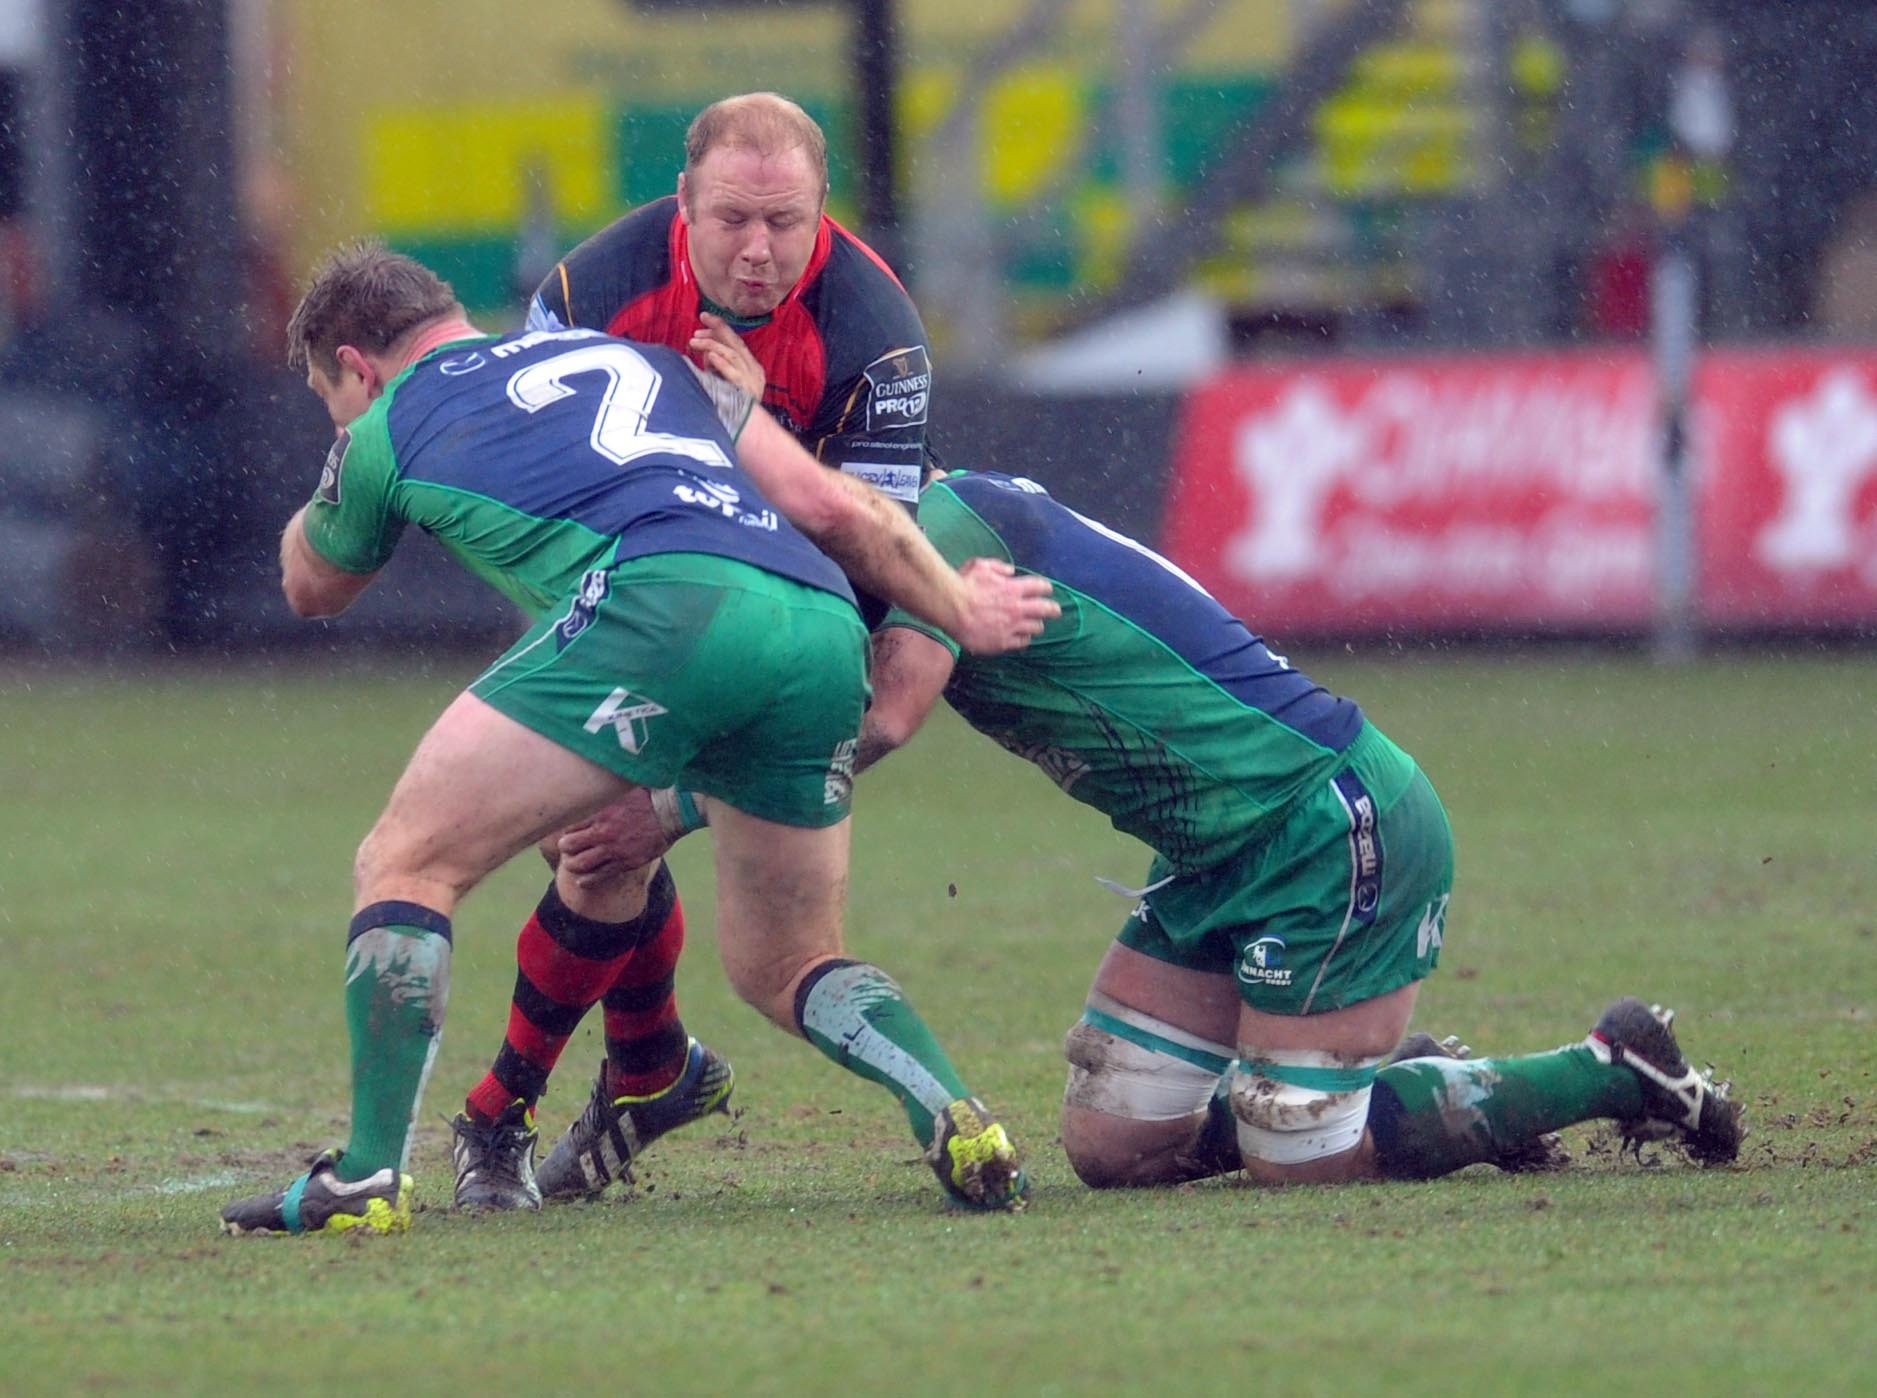 IMPACT: Brok Harris settled quickly in his first Dragons campaign